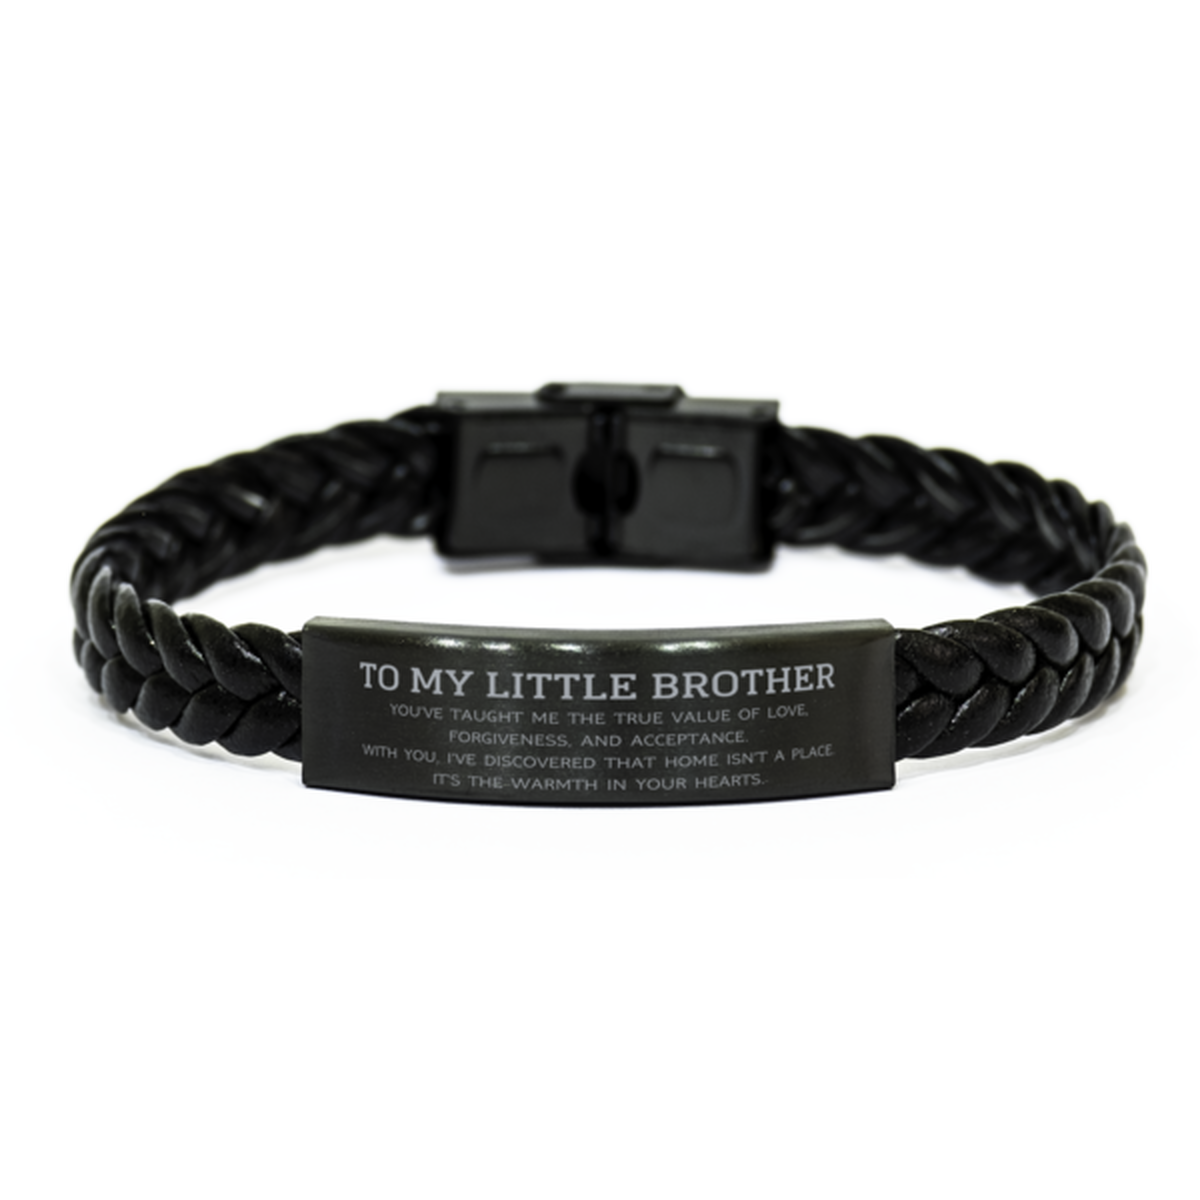 To My Little Brother Gifts, You've taught me the true value of love, Thank You Gifts For Little Brother, Birthday Braided Leather Bracelet For Little Brother